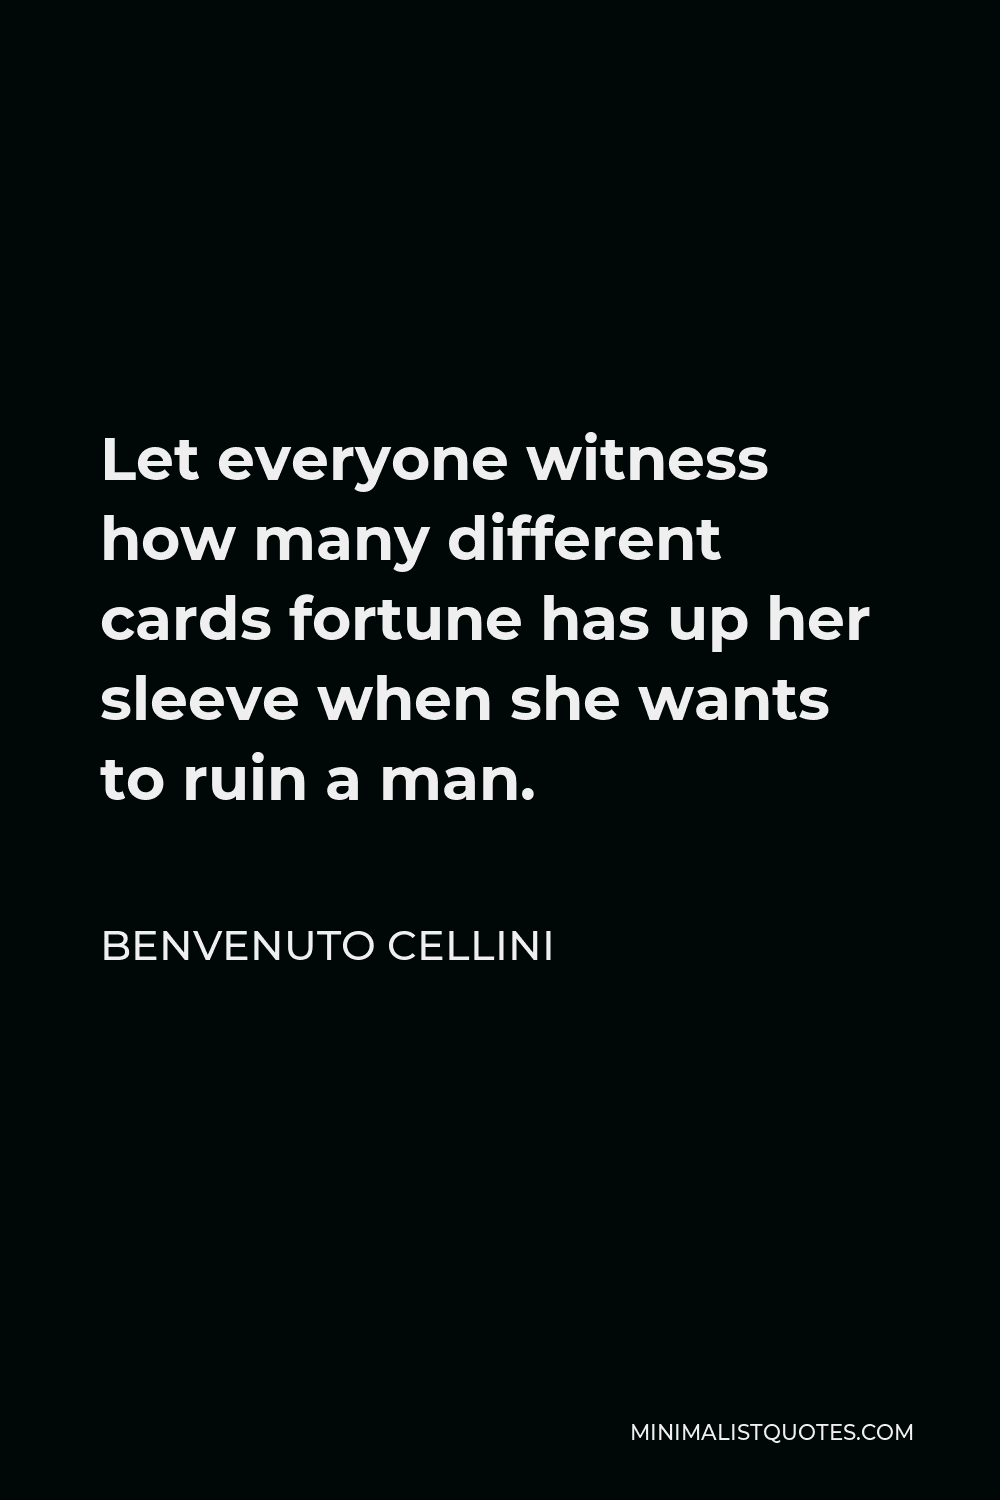 Benvenuto Cellini Quote - Let everyone witness how many different cards fortune has up her sleeve when she wants to ruin a man.